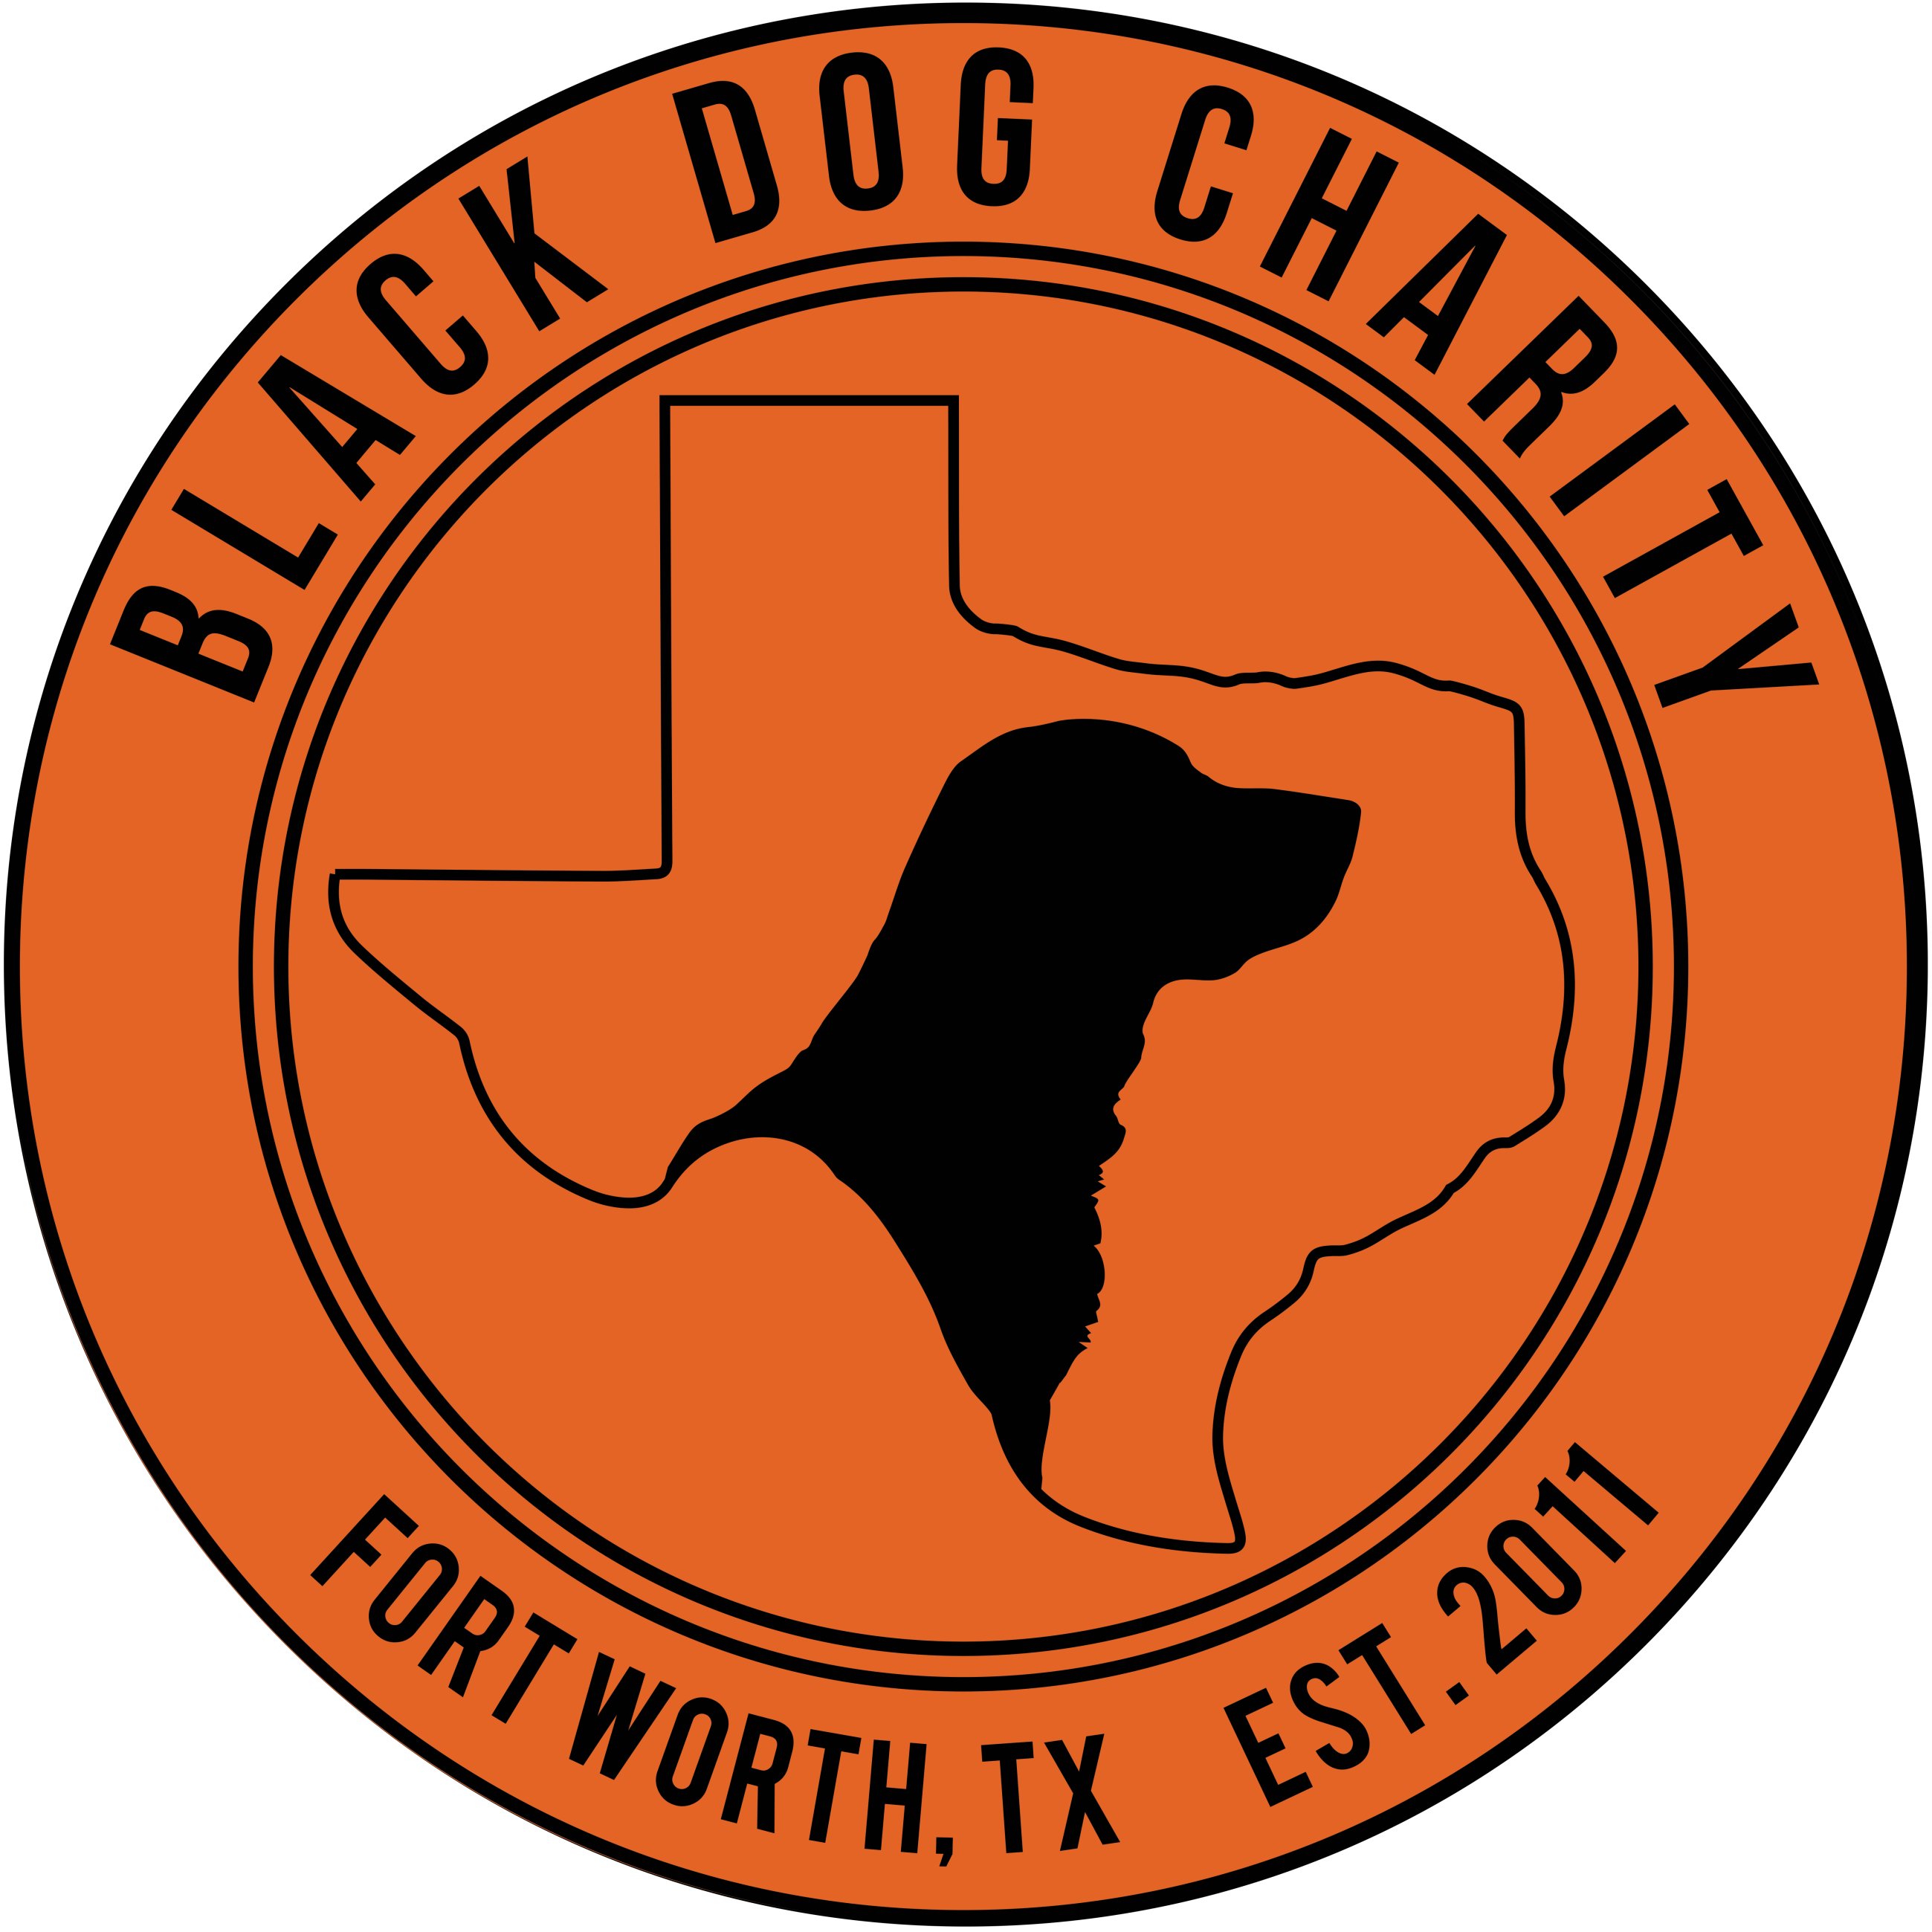 Black Dog Charity - Auction Party/Clay Shoot